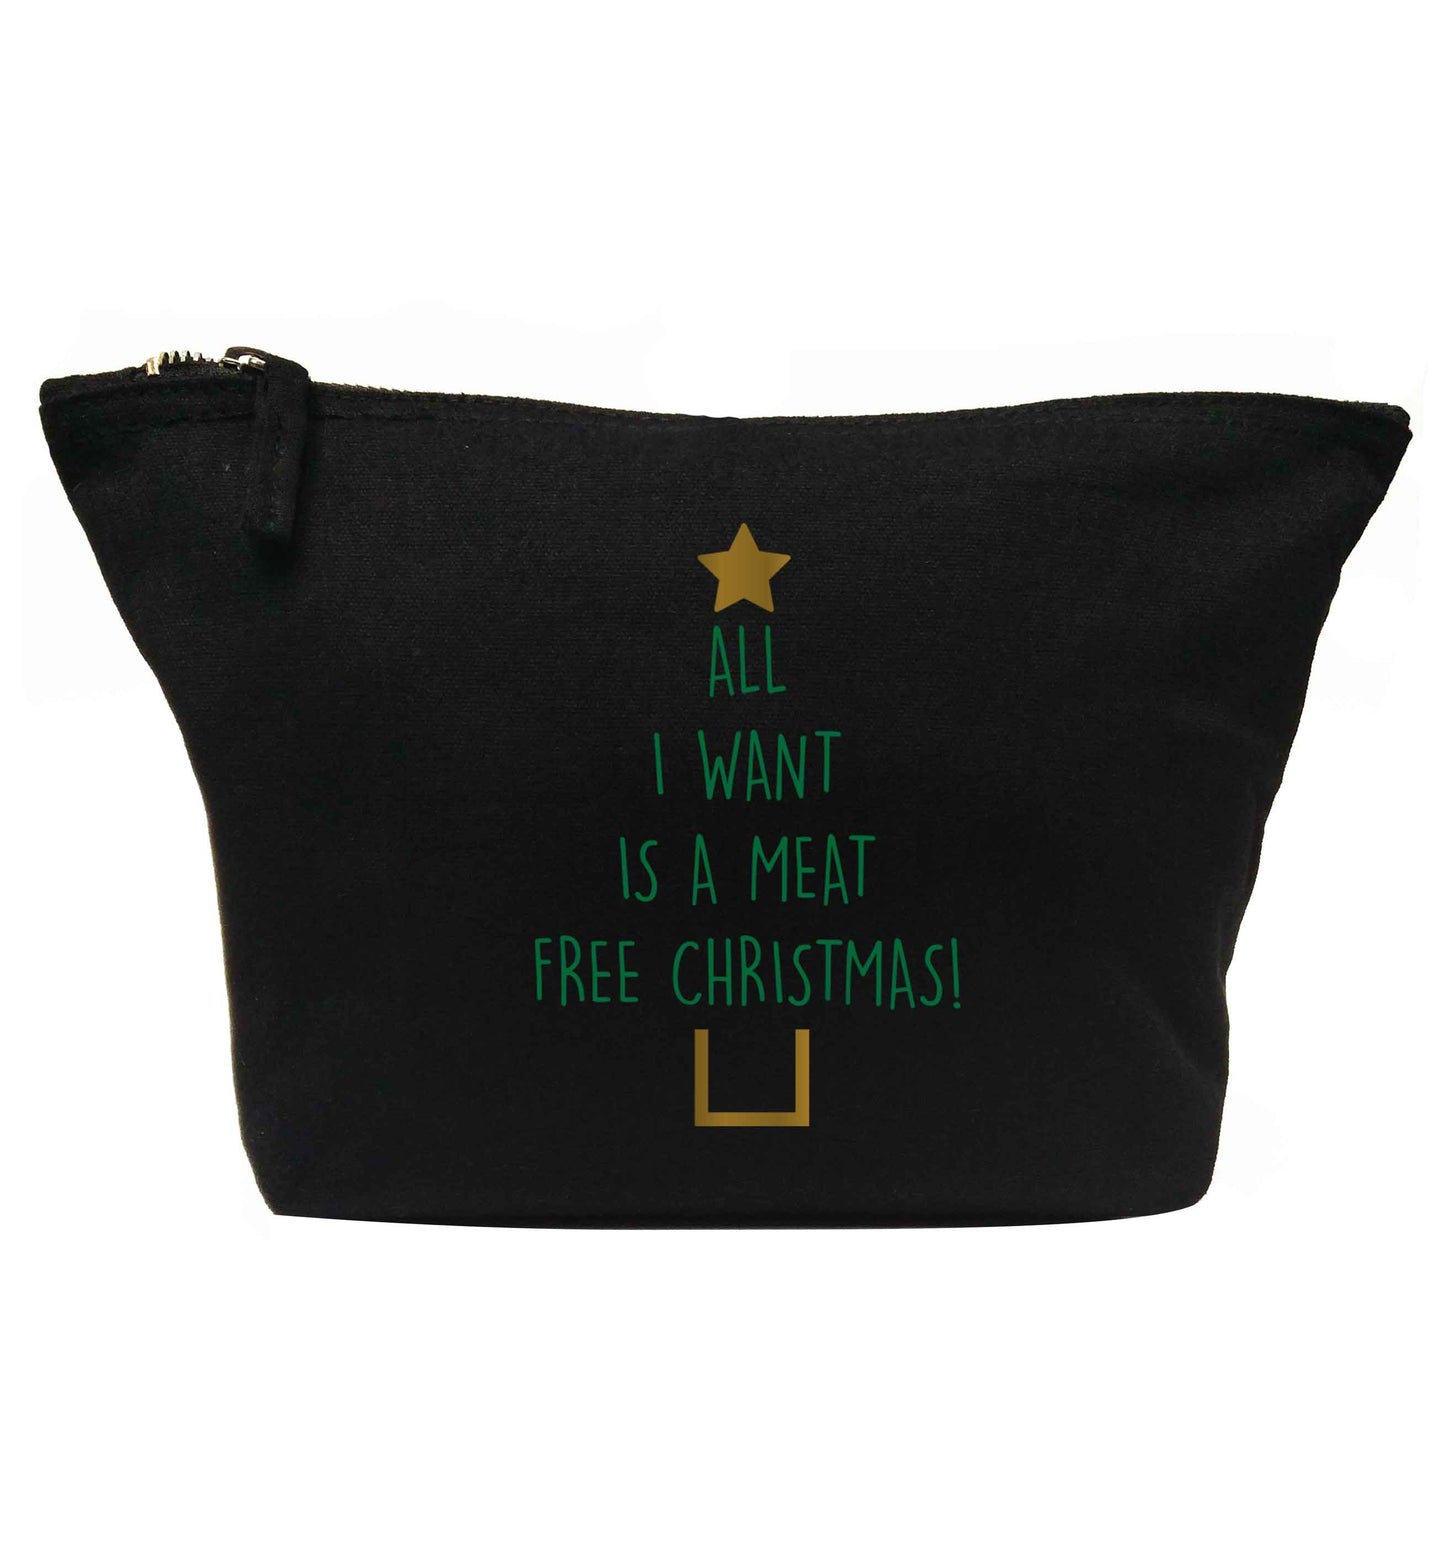 All I want is a meat free Christmas | makeup / wash bag